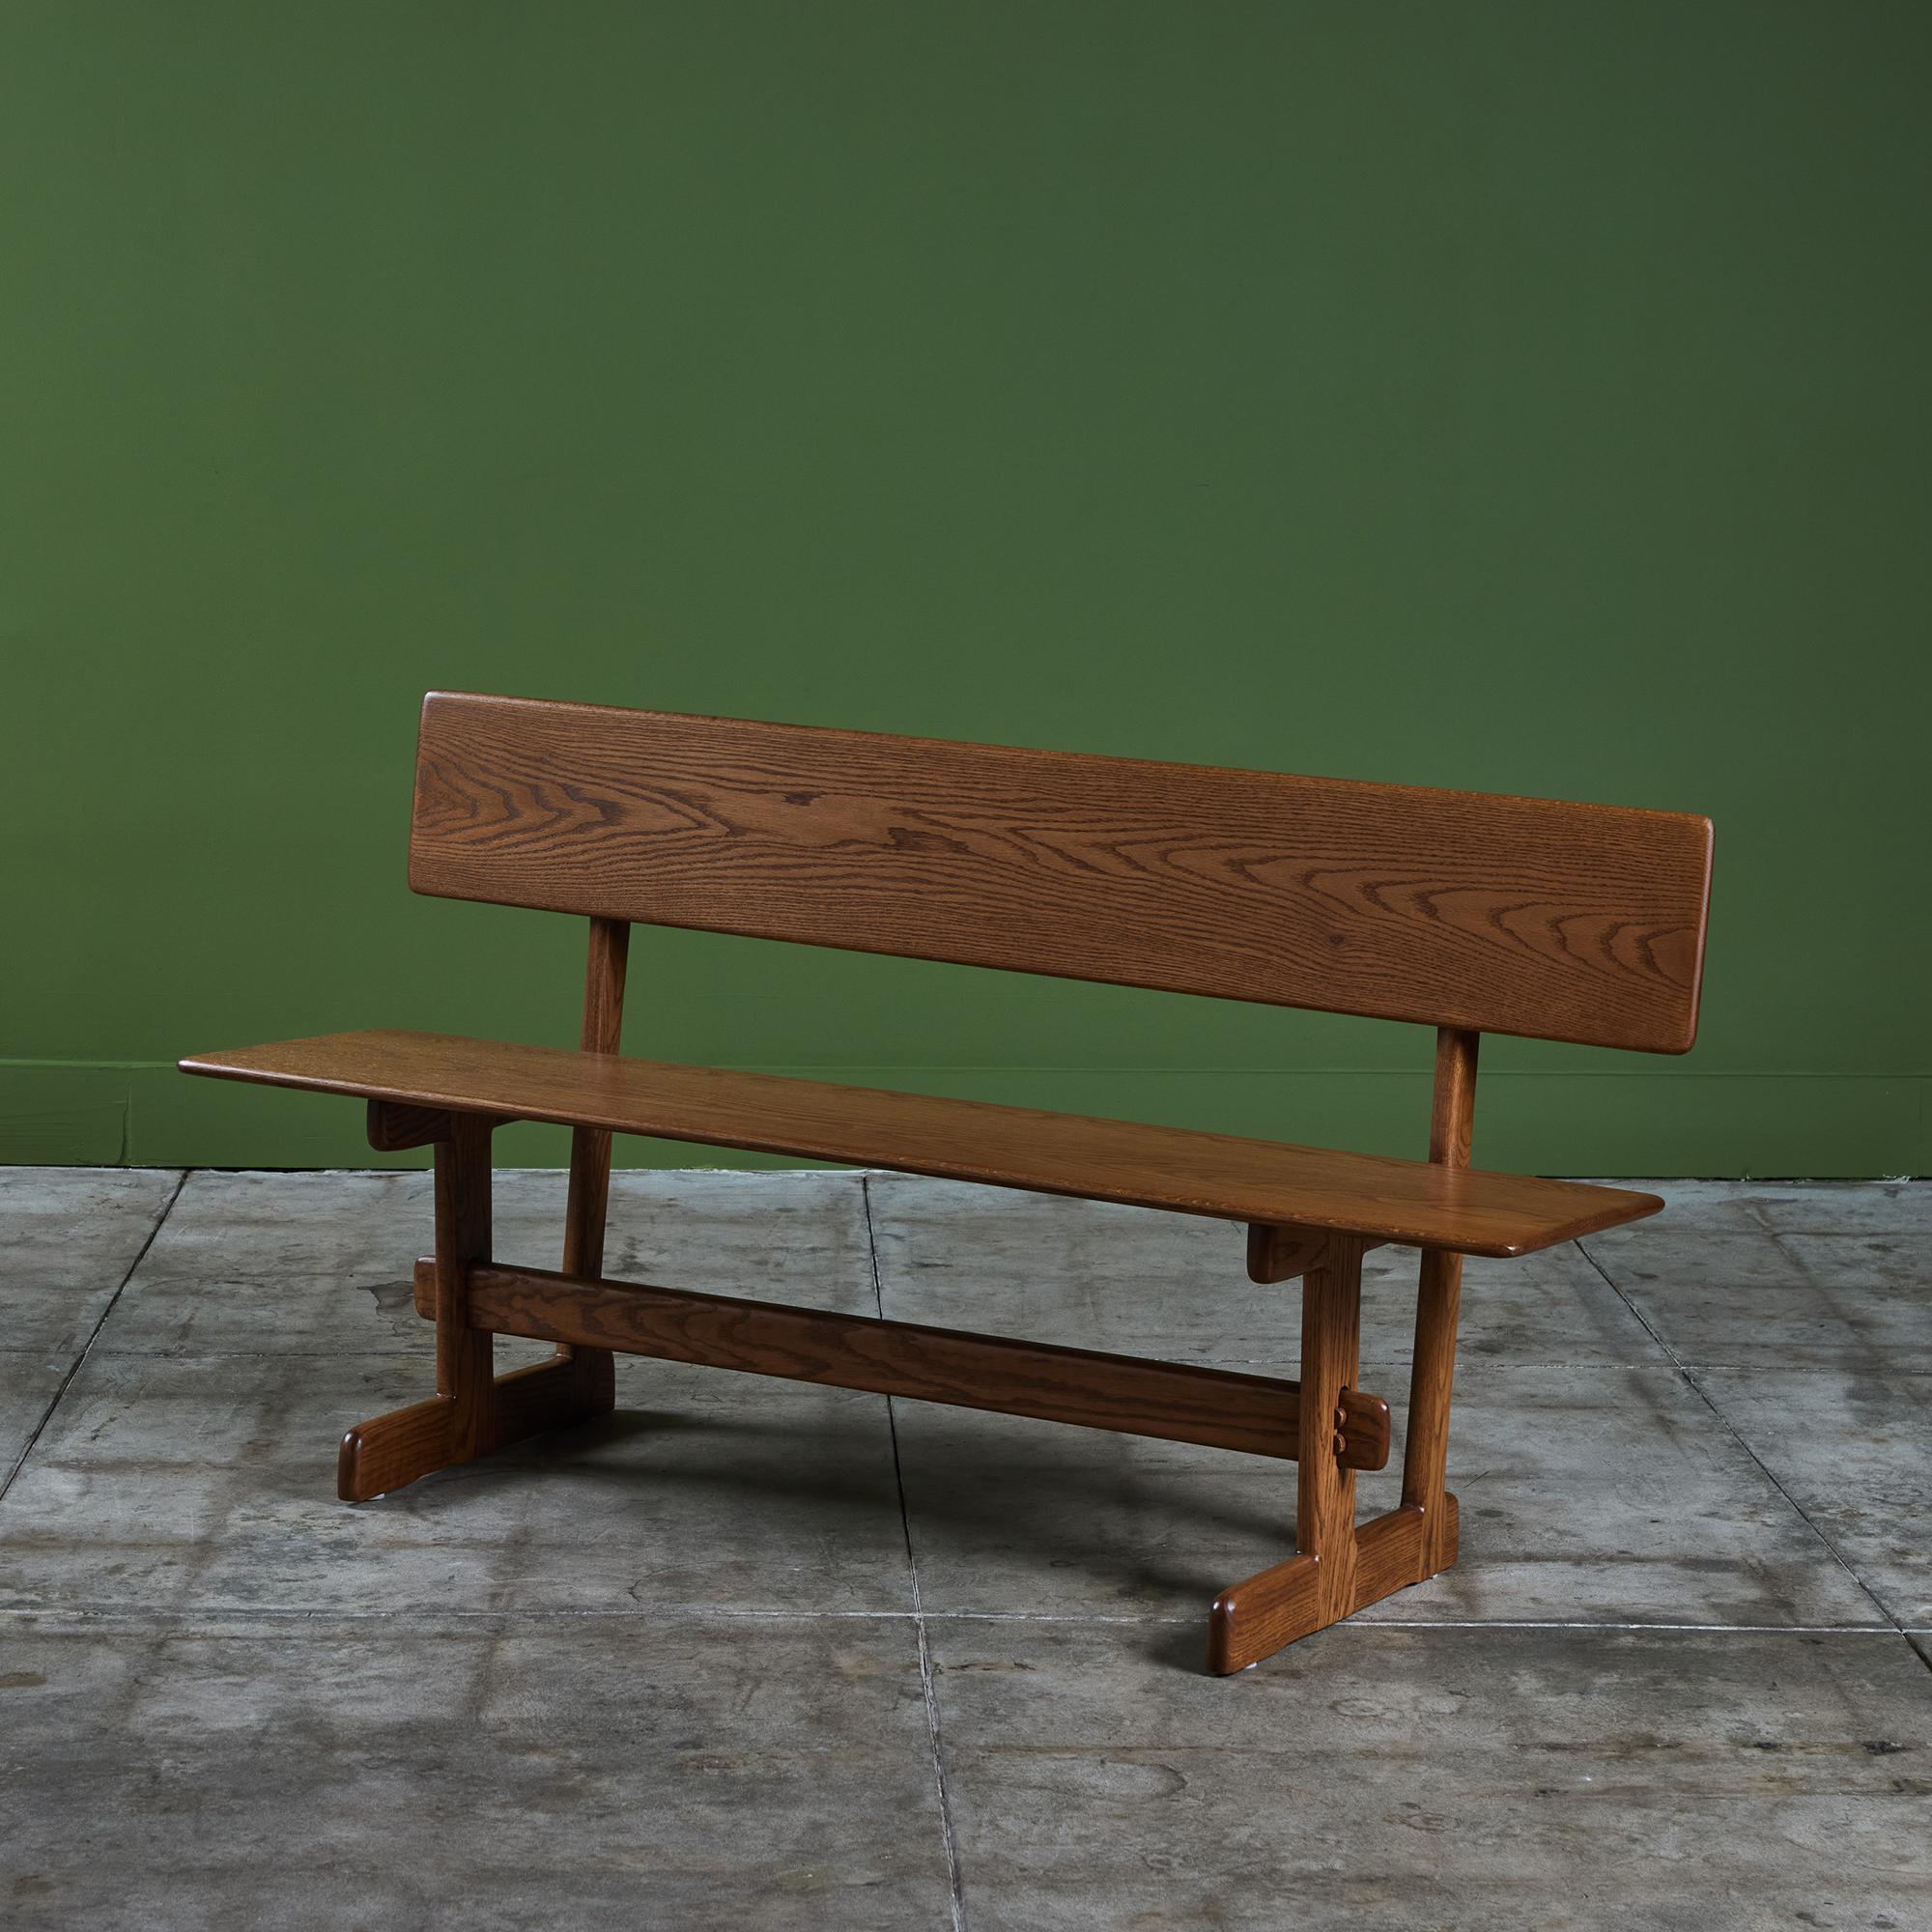 Oak bench from American designer Gerald McCabe for Eon Furniture, c.1970s. The solid wood bench has a long seat with seat back perfect for a dining table, living room or entry way. Pairs beautifully with the Gerald McCabe Oak Trestle Dining